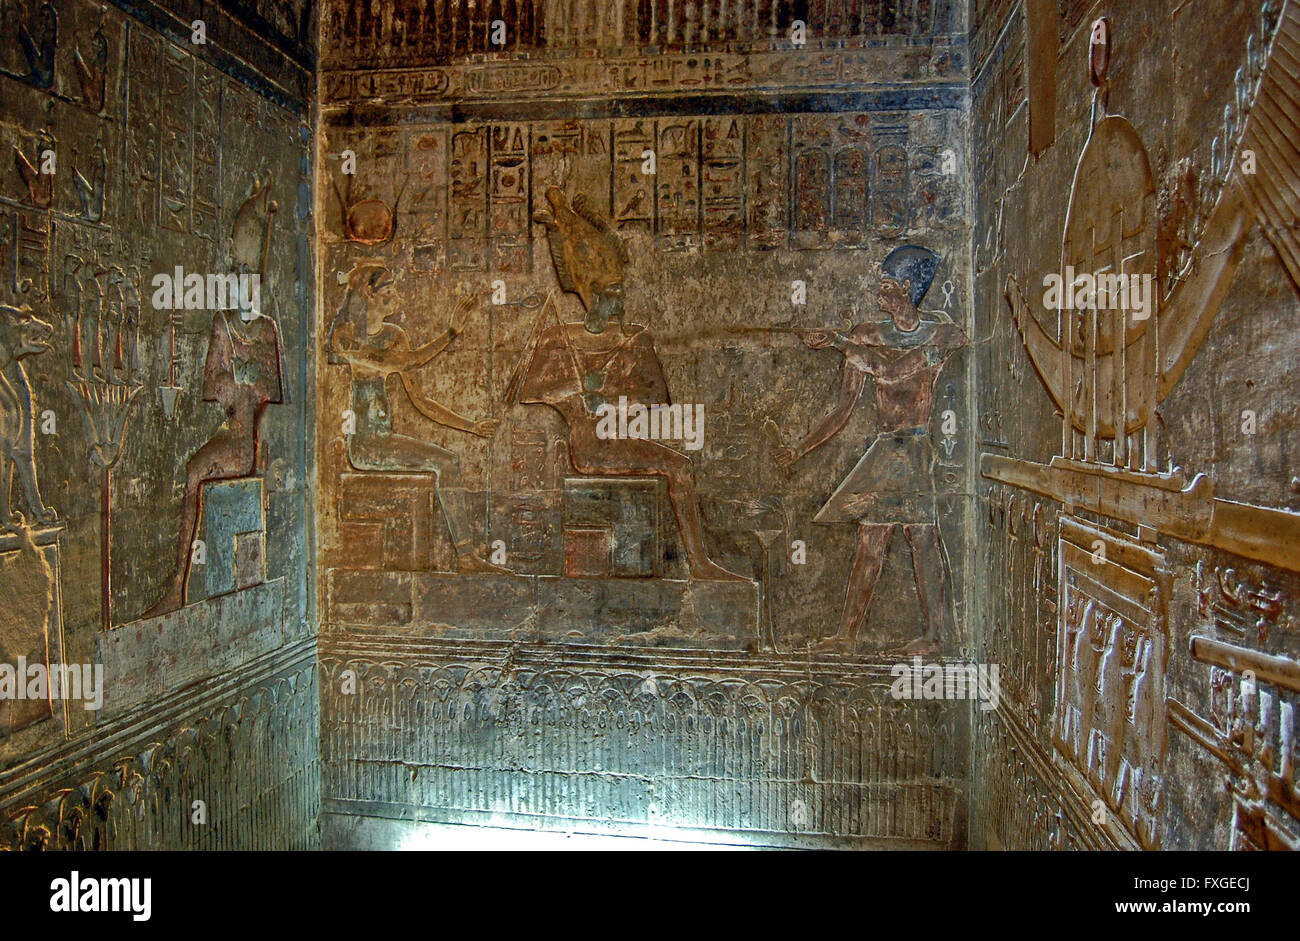 A wall carving hieroglyphic with coloured paint, in Valley of the Kings, Luxor, Egypt Stock Photo